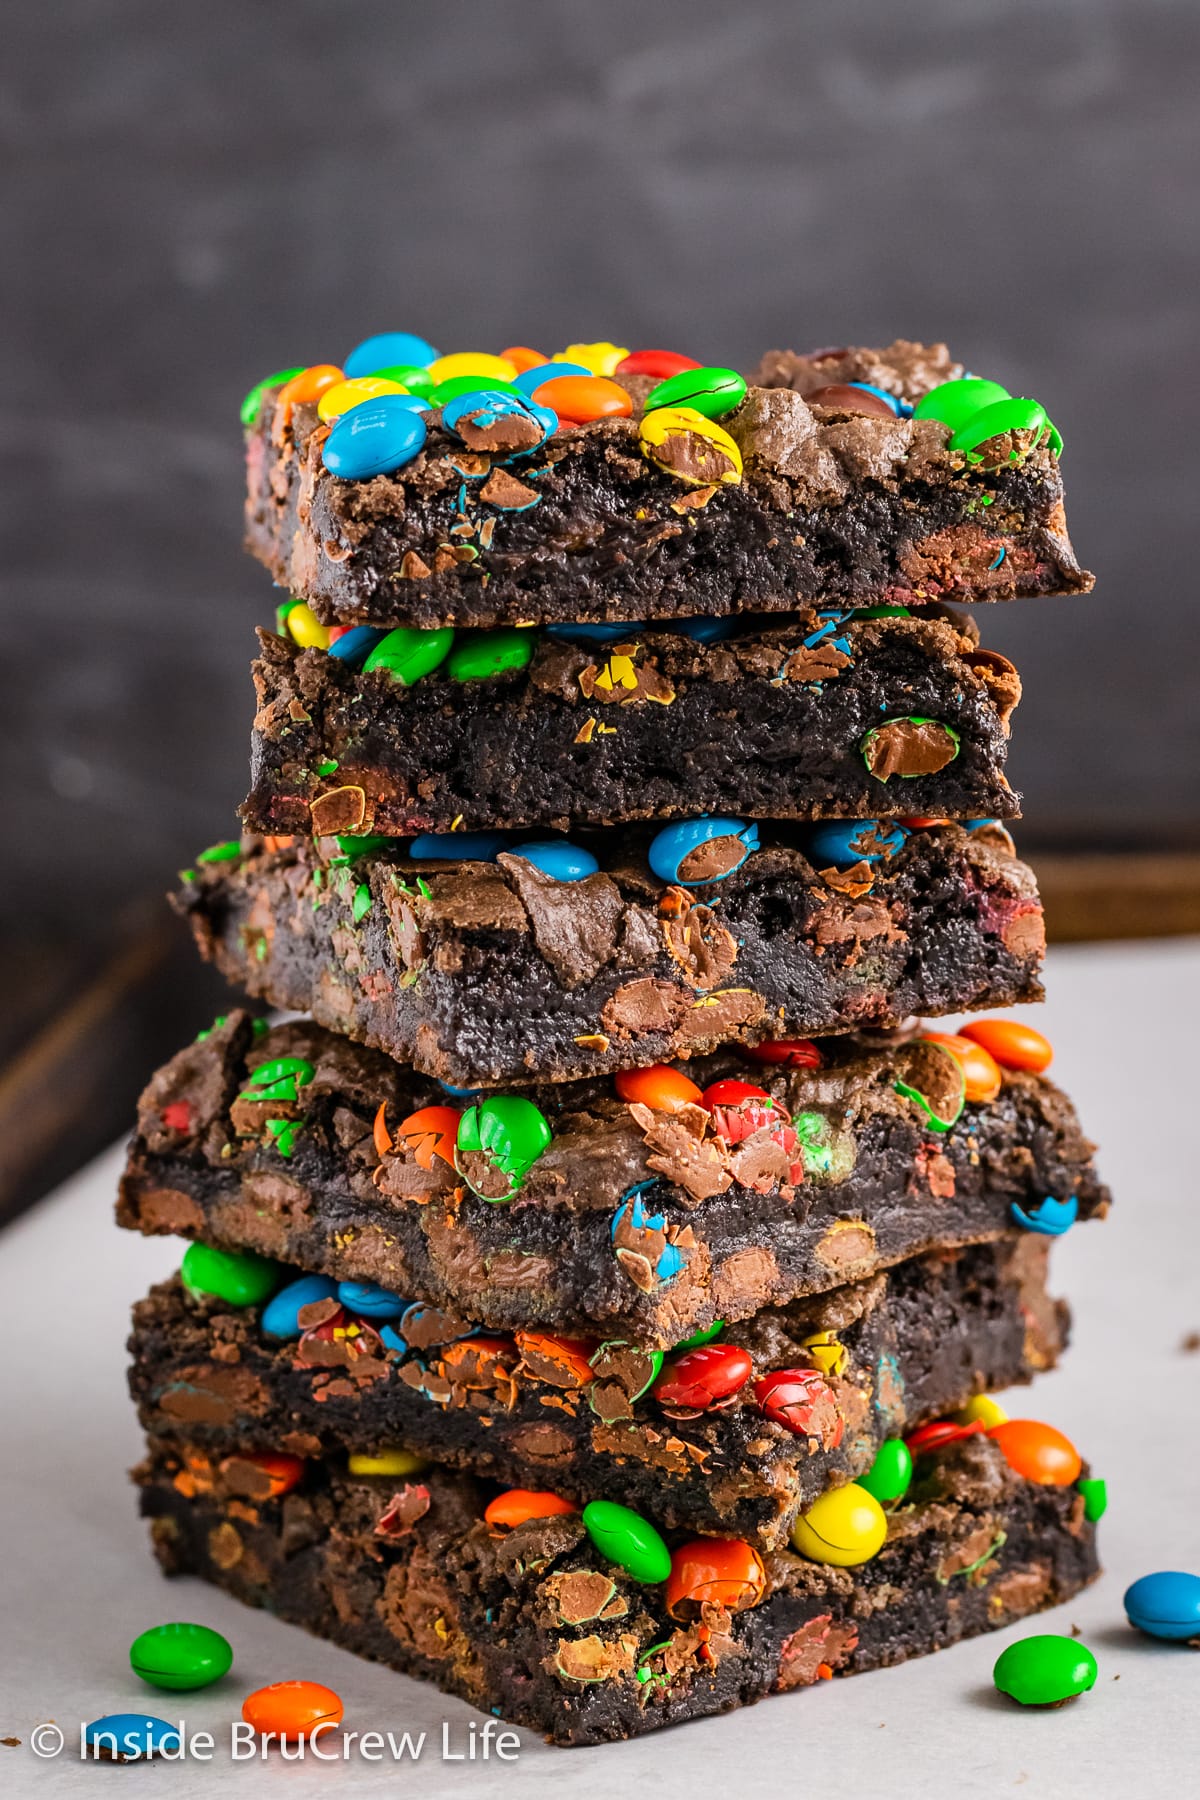 A stack of 6 brownies with colorful candies inside and on top.